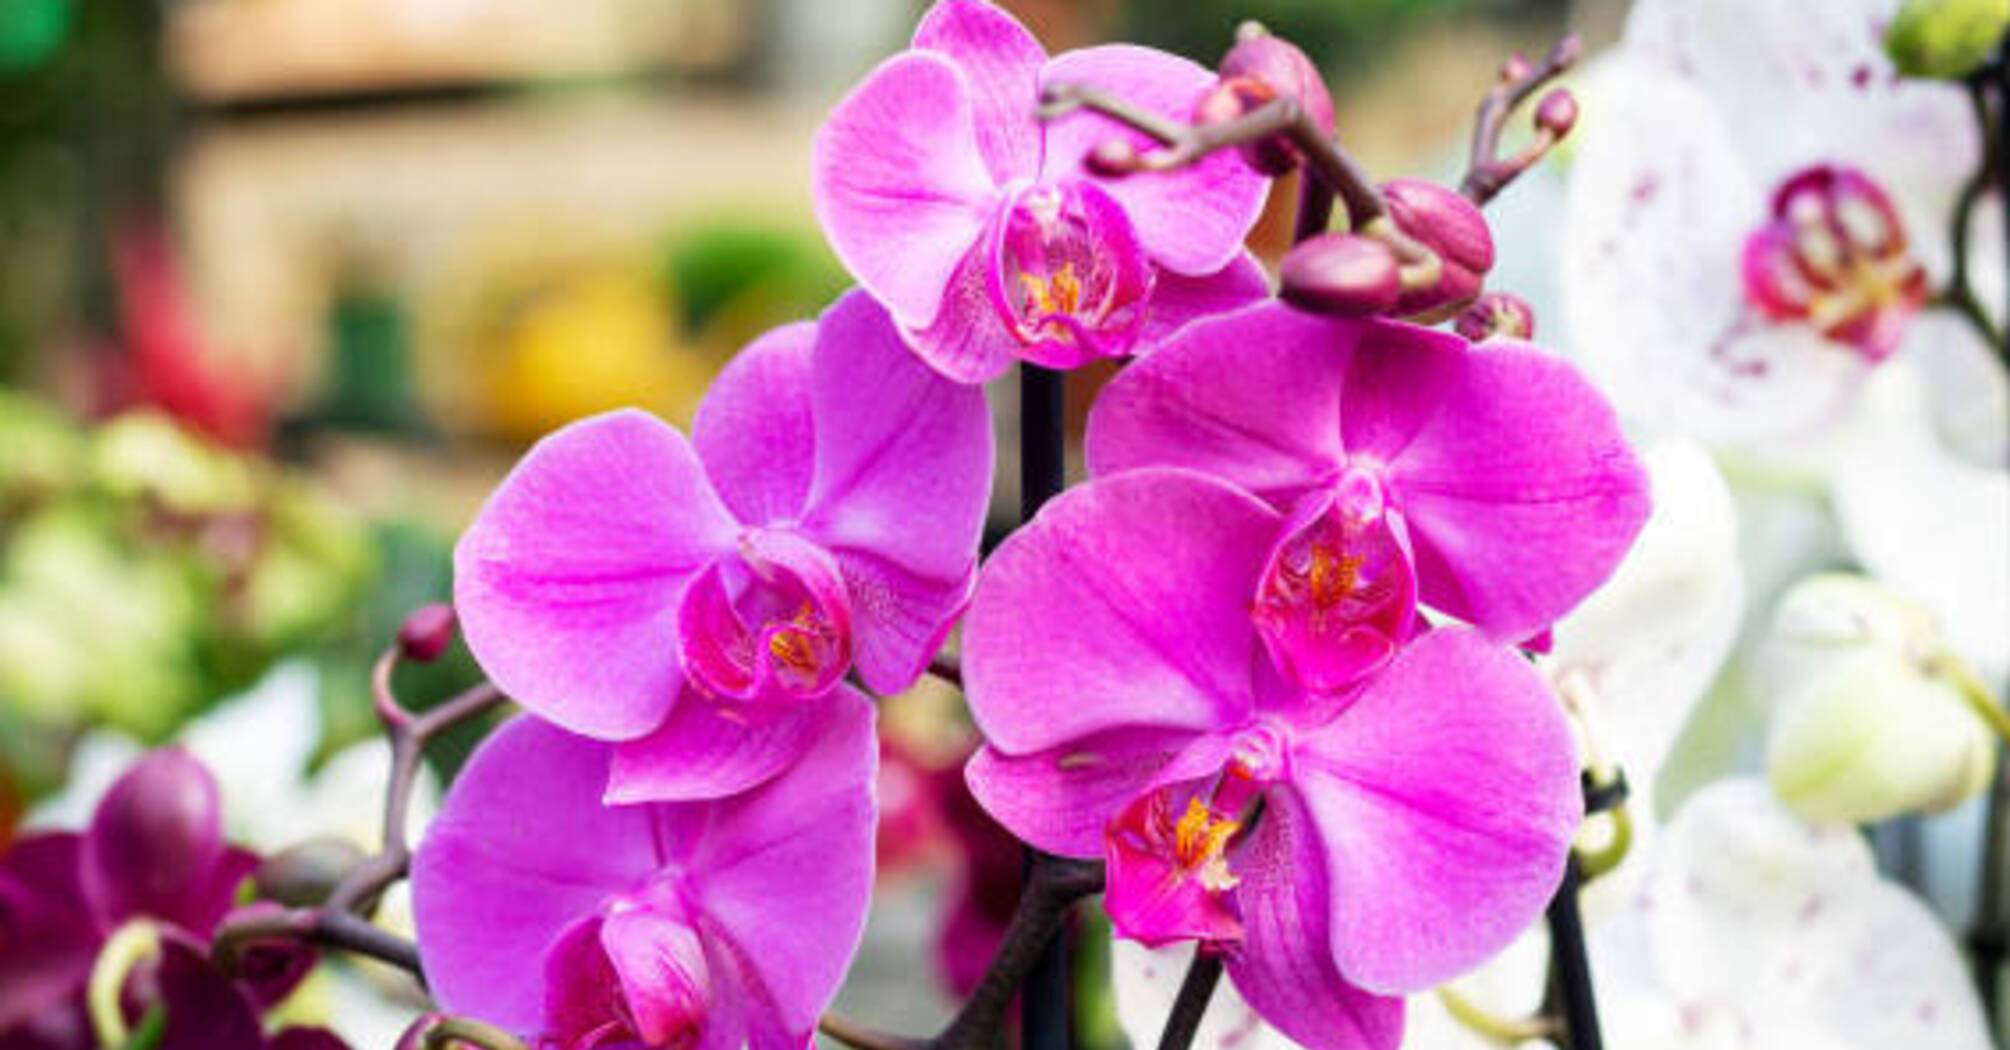 How to revive a faded orchid: 5 effective tips